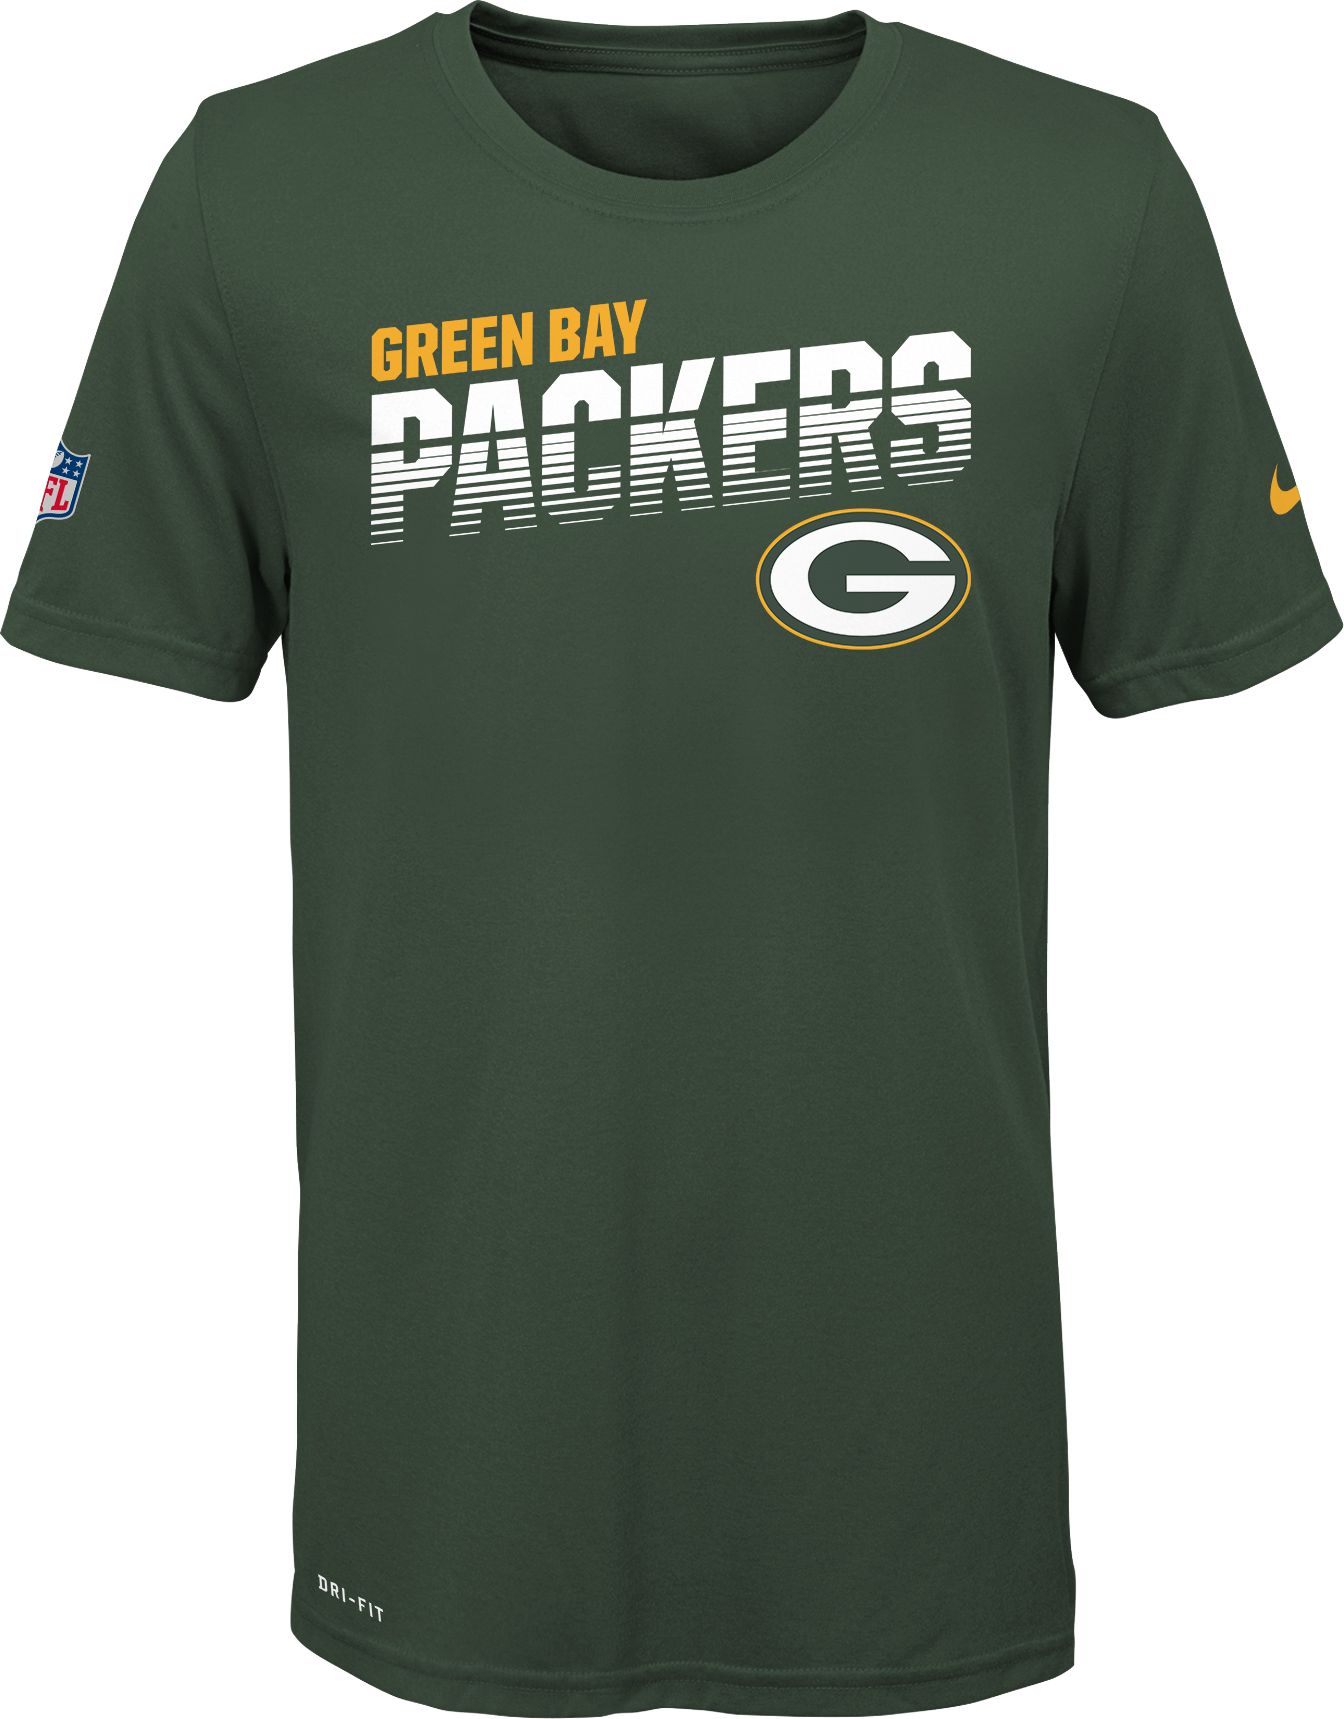 Nike Youth Green Bay Packers Sideline 